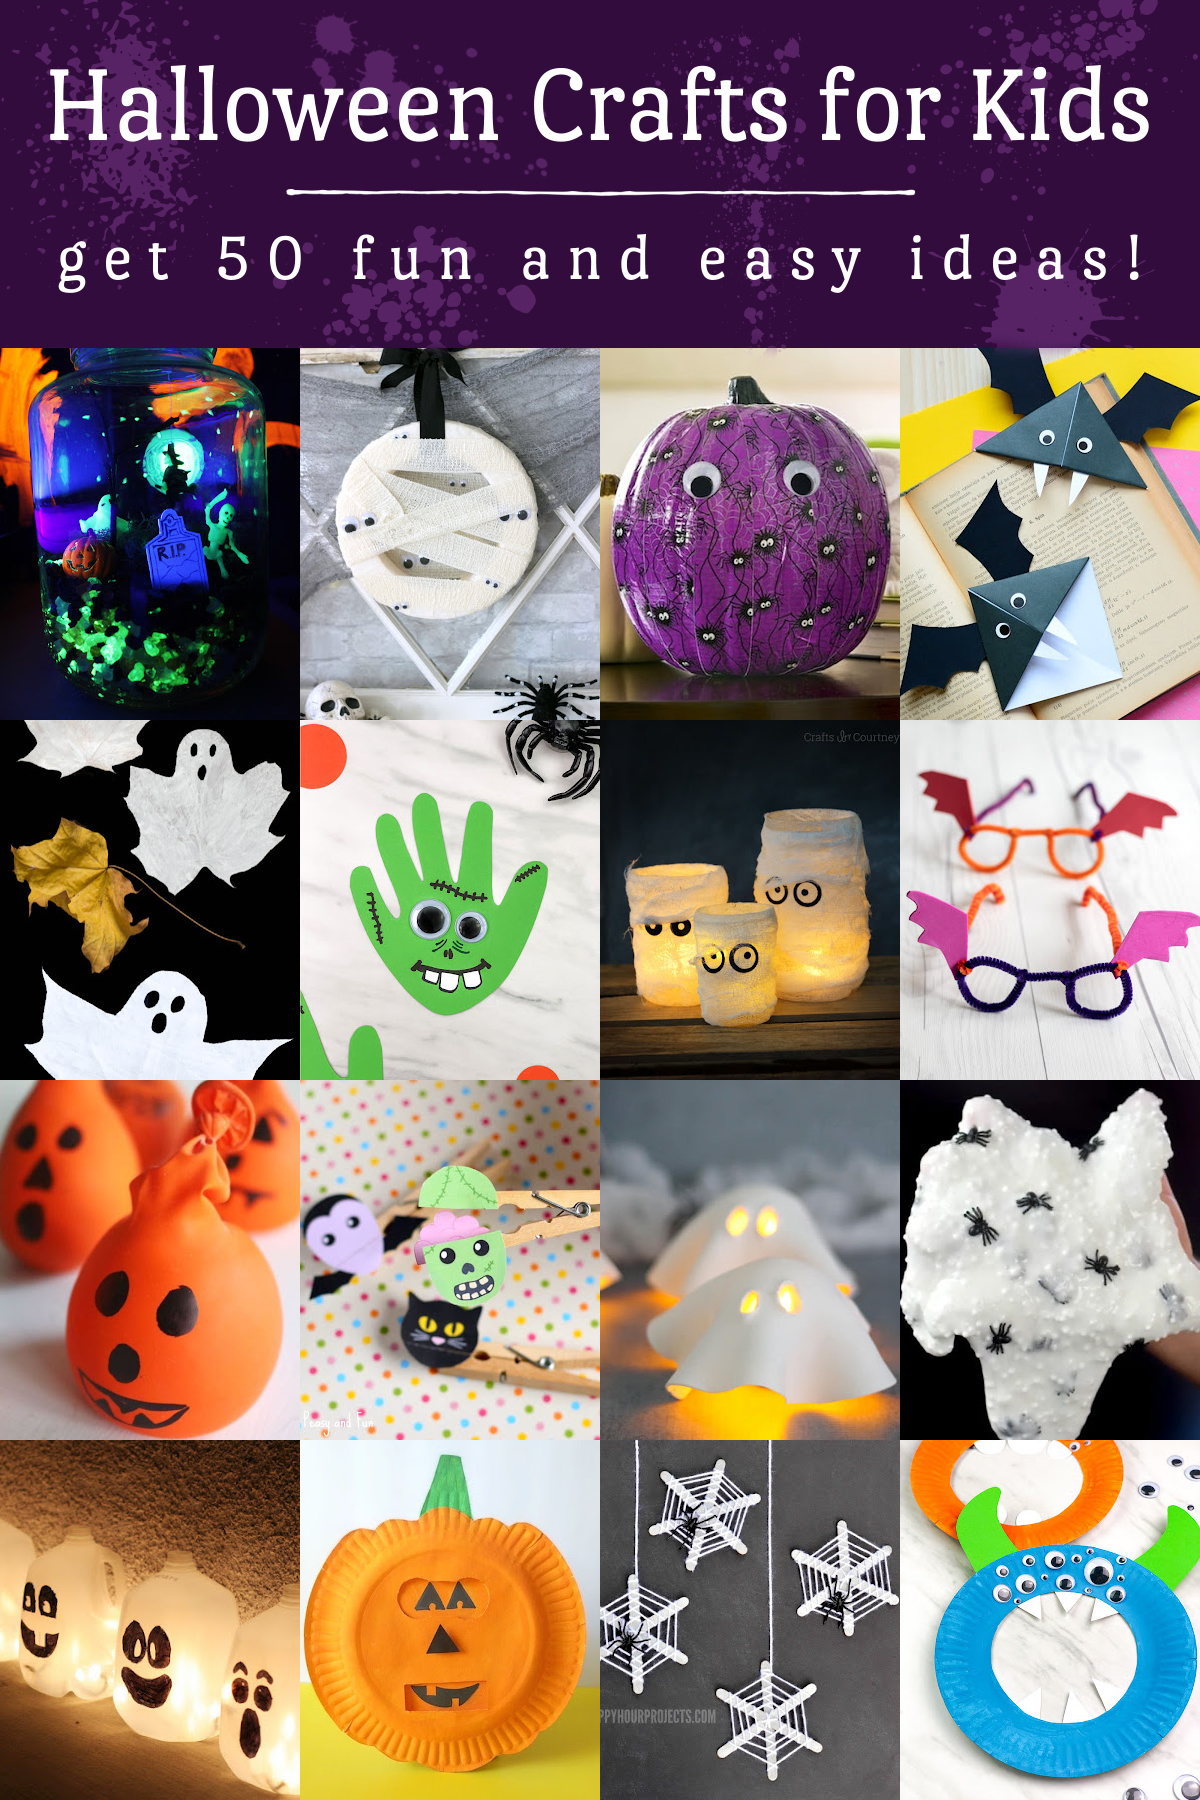 Halloween Crafts for Kids: 50 Spooky Projects! - Mod Podge Rocks